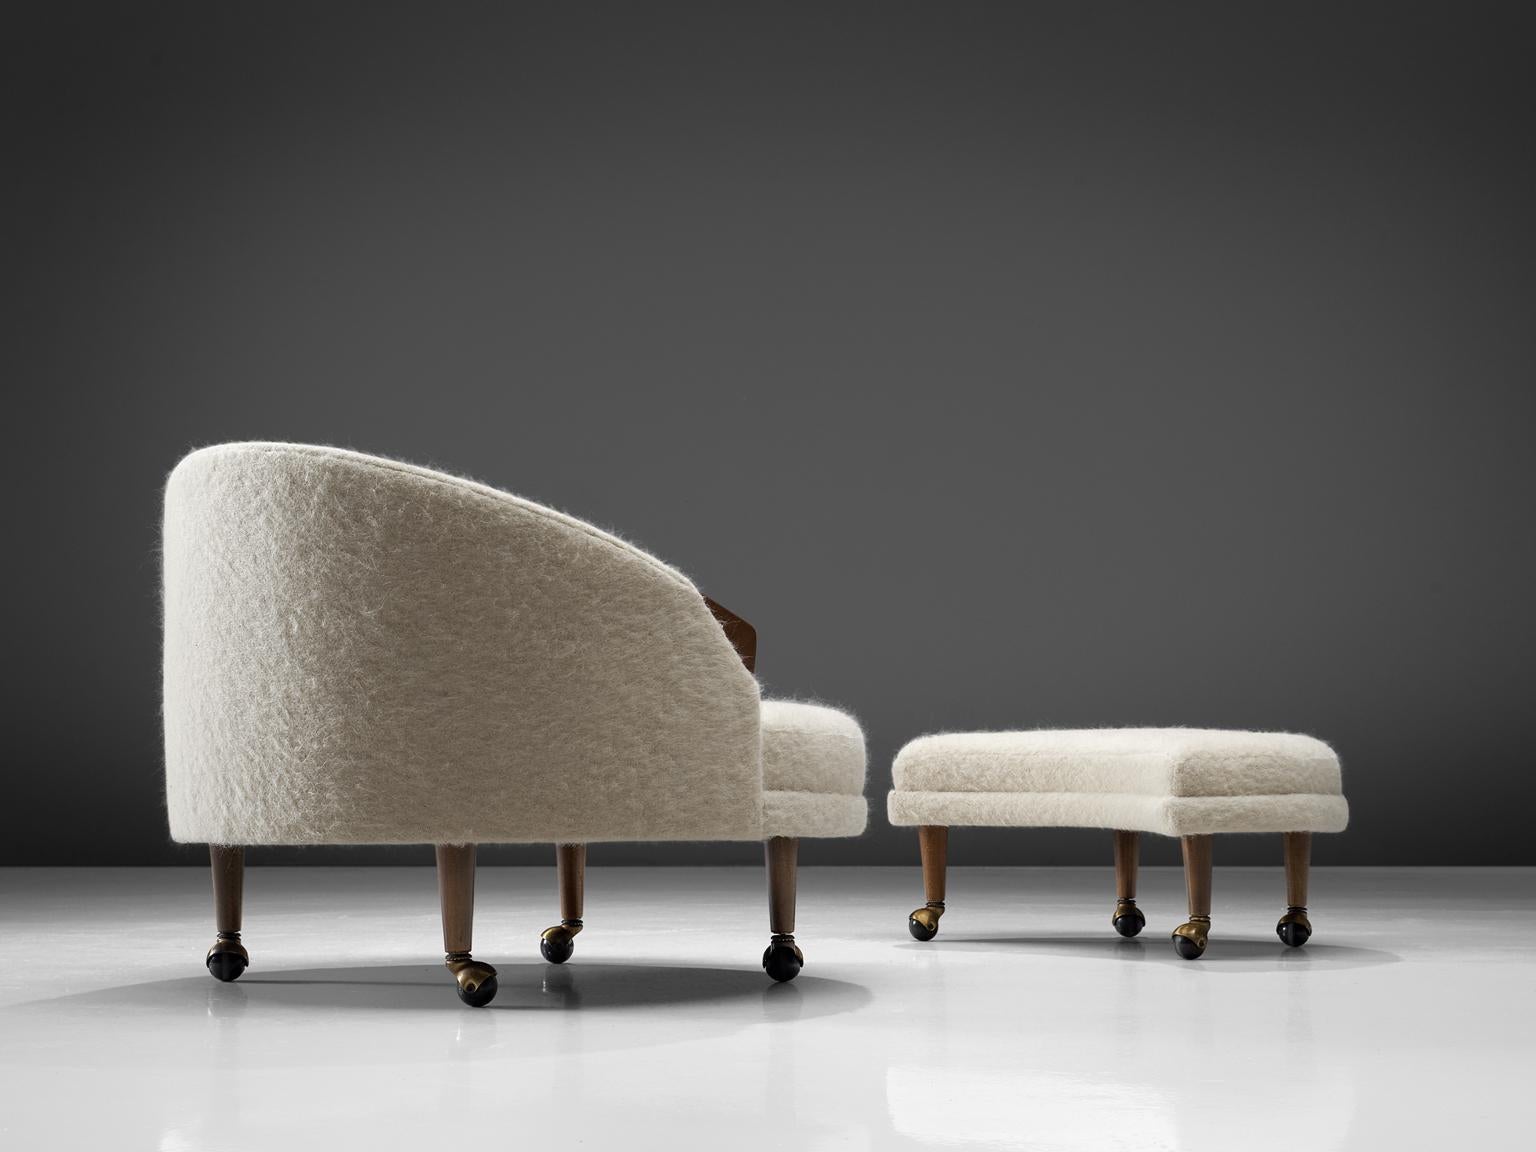 Mid-Century Modern Adrian Pearsall Havana Lounge Chair and Ottoman in Pierre Frey Wool